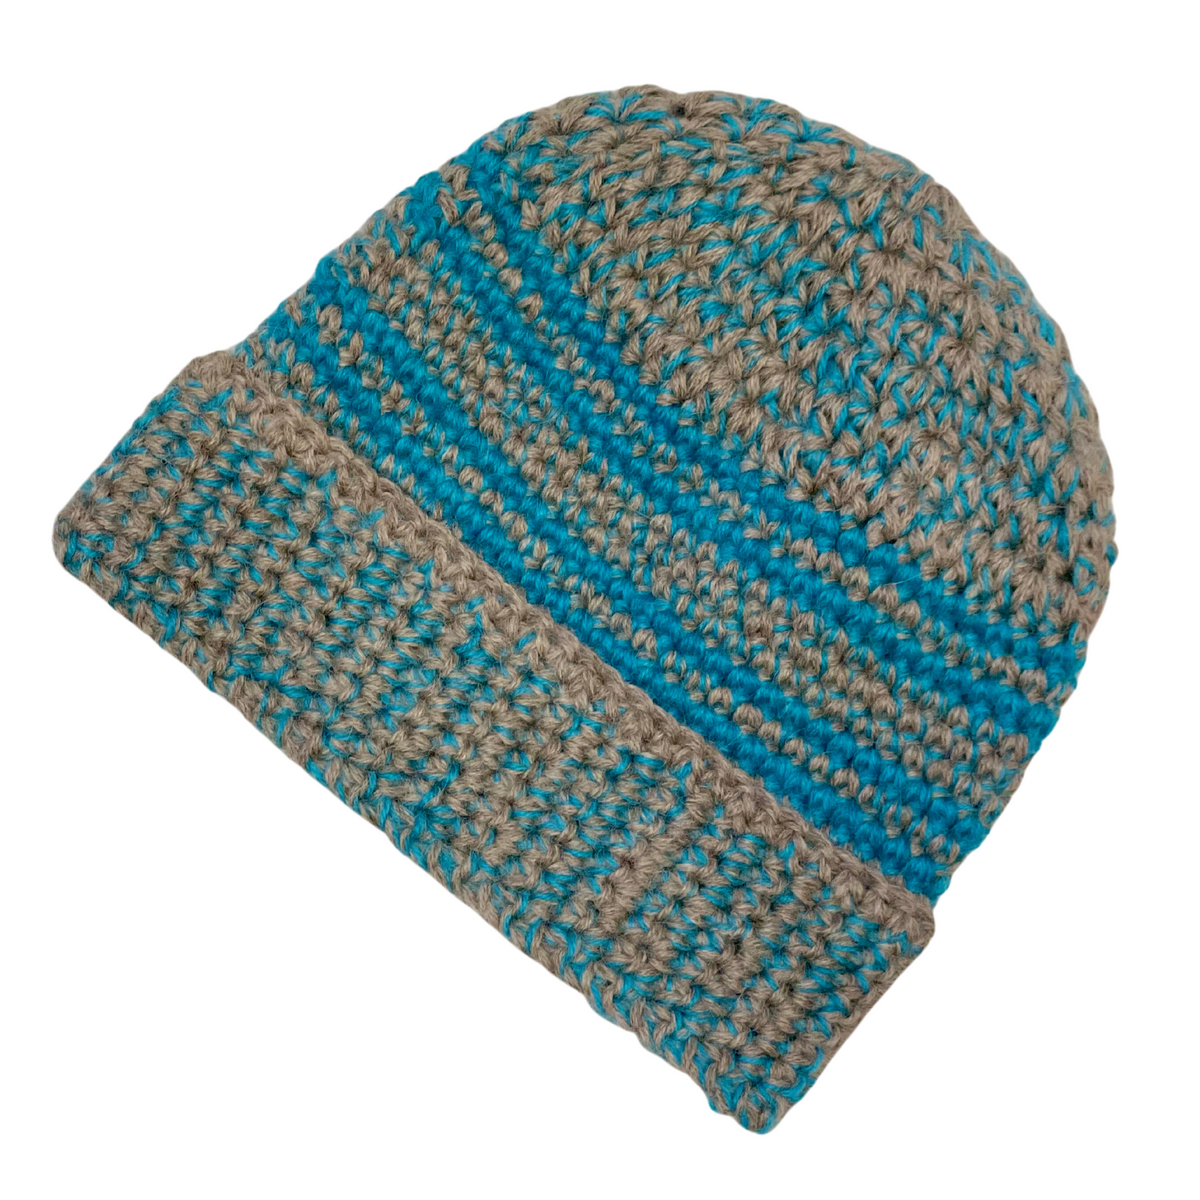 A product photo with a white background of an Alpacas of Montana soft cozy comfortable stylish thermal fashionable moisture wicking antimicrobial knitted crochet toboggan rolled cuff beanie hat handmade in Montana from latte brown and bright teal aqua blue alpaca wool and bamboo yarn.